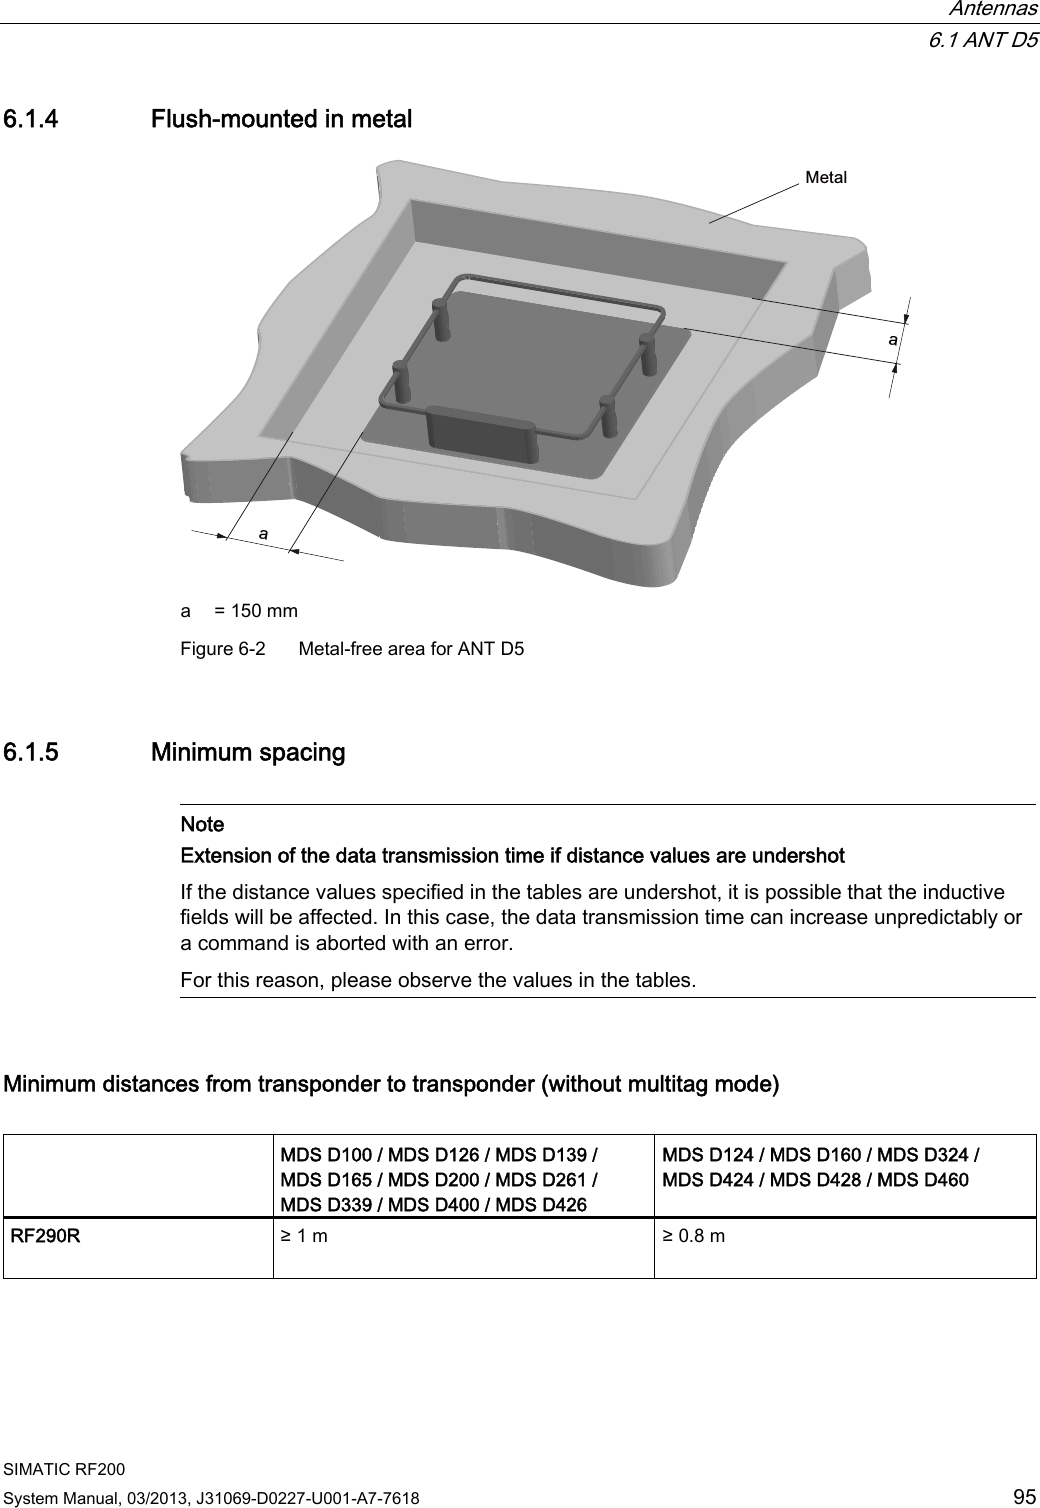  Antennas  6.1 ANT D5 SIMATIC RF200 System Manual, 03/2013, J31069-D0227-U001-A7-7618  95 6.1.4 Flush-mounted in metal 0HWDODD a  = 150 mm Figure 6-2  Metal-free area for ANT D5 6.1.5 Minimum spacing   Note Extension of the data transmission time if distance values are undershot If the distance values specified in the tables are undershot, it is possible that the inductive fields will be affected. In this case, the data transmission time can increase unpredictably or a command is aborted with an error. For this reason, please observe the values in the tables.  Minimum distances from transponder to transponder (without multitag mode)    MDS D100 / MDS D126 / MDS D139 /  MDS D165 / MDS D200 / MDS D261 /  MDS D339 / MDS D400 / MDS D426 MDS D124 / MDS D160 / MDS D324 /  MDS D424 / MDS D428 / MDS D460 RF290R  ≥ 1 m  ≥ 0.8 m  